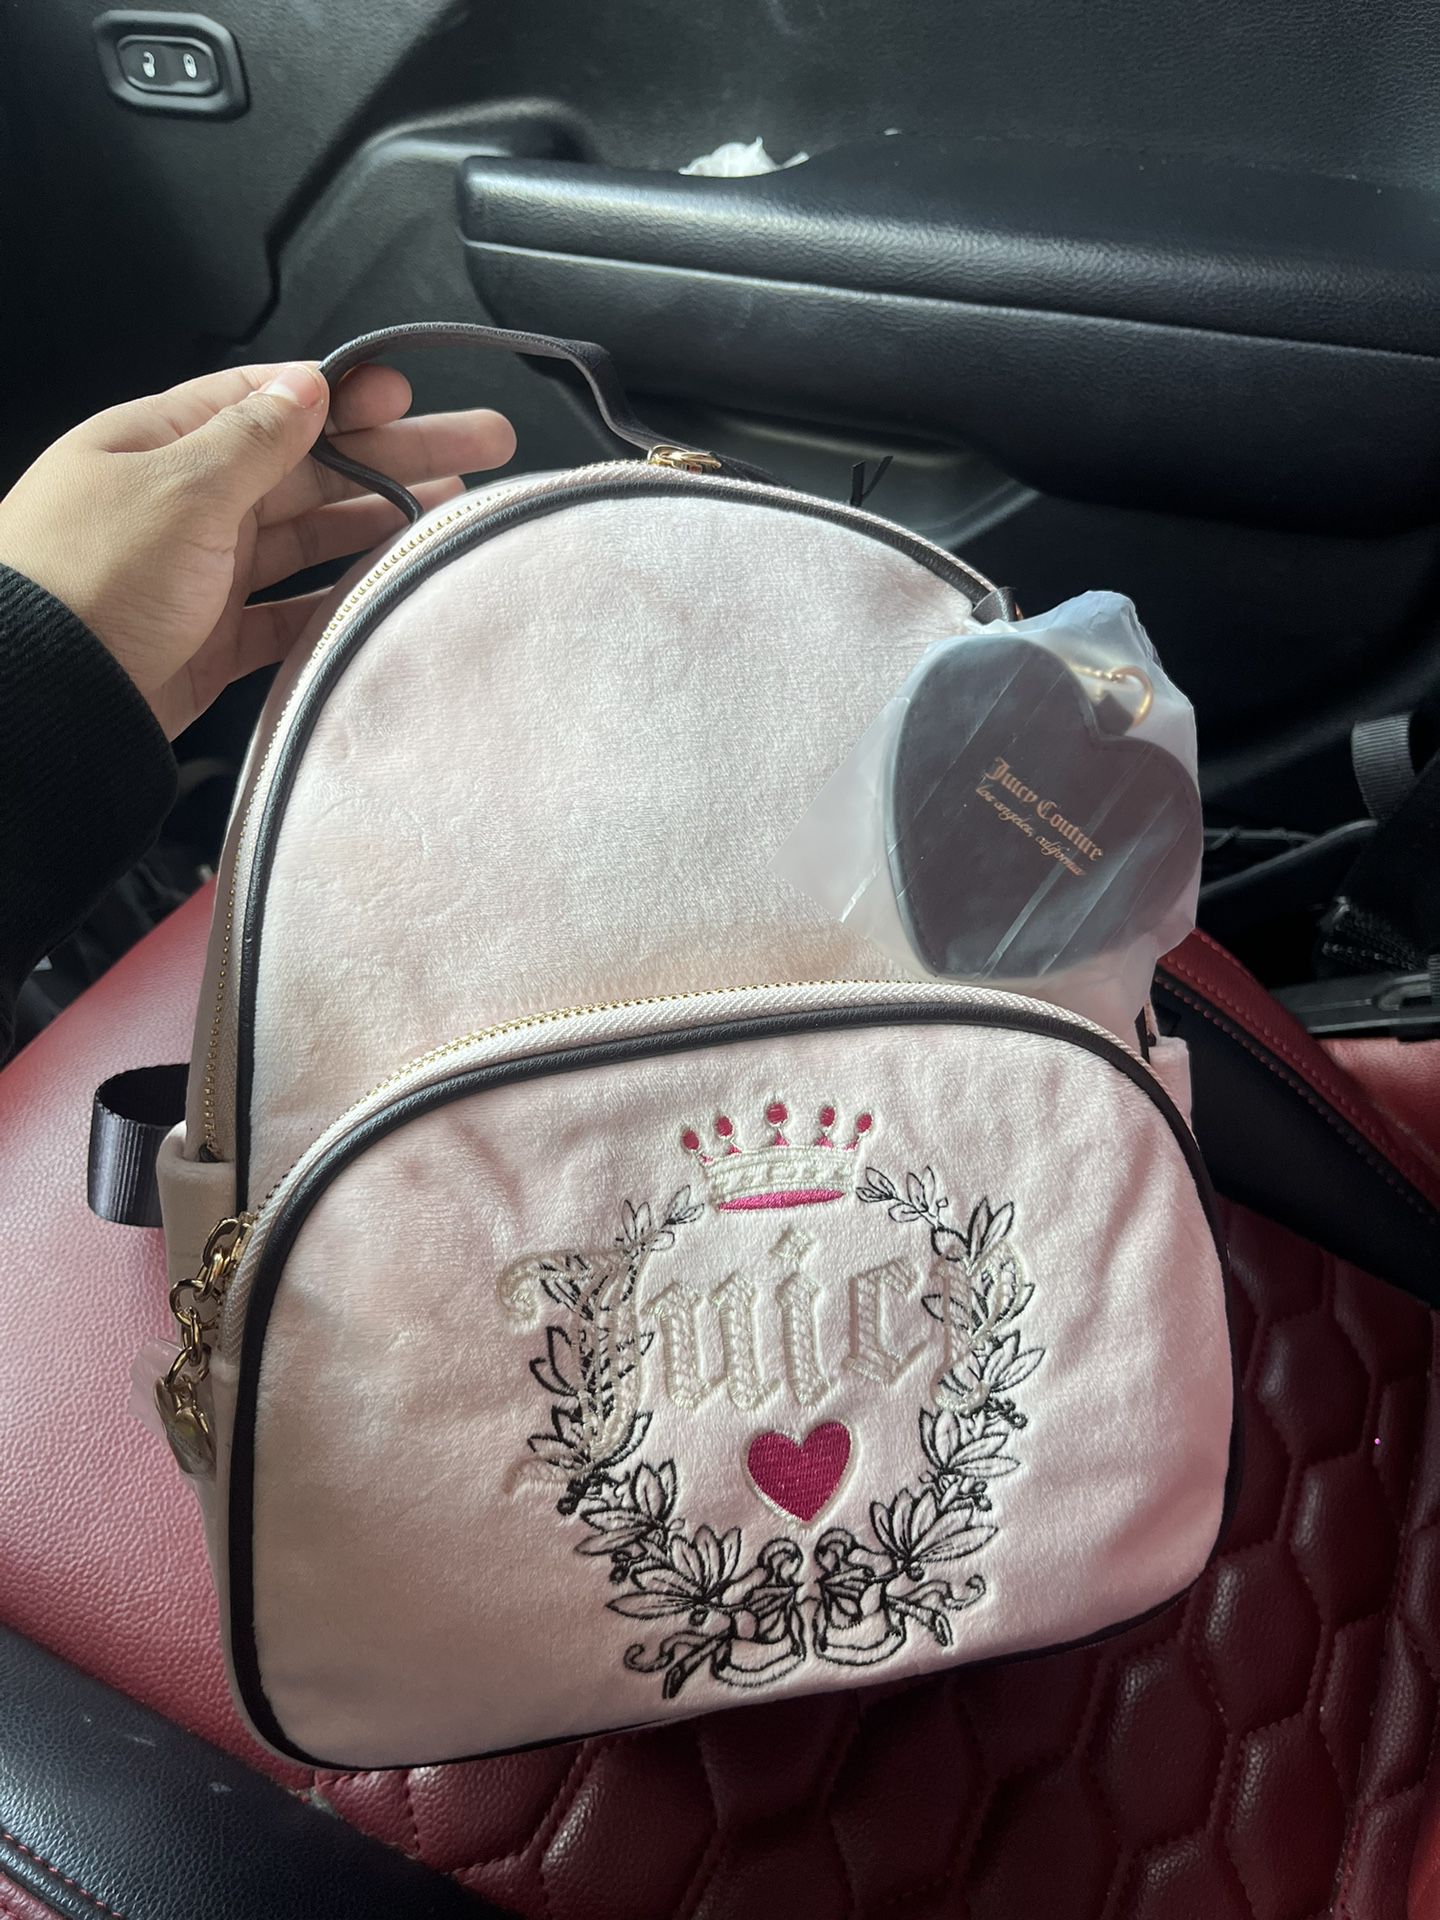 Juicy Couture Backpack 